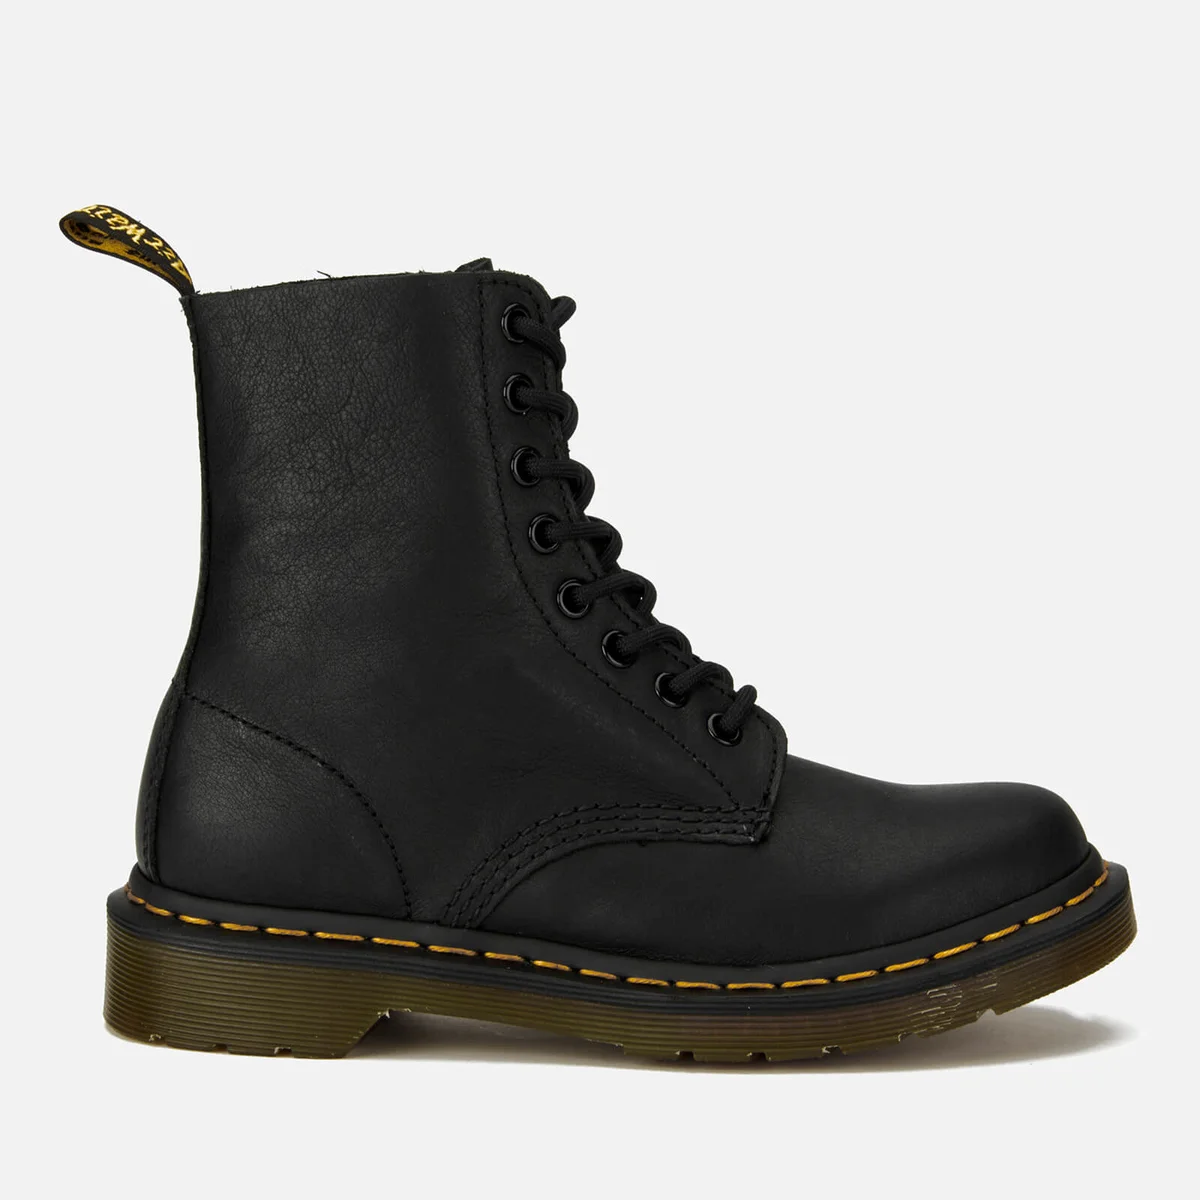 Dr. Martens Women's 1460 Pascal Virginia Leather 8-Eye Boots - Black Image 1